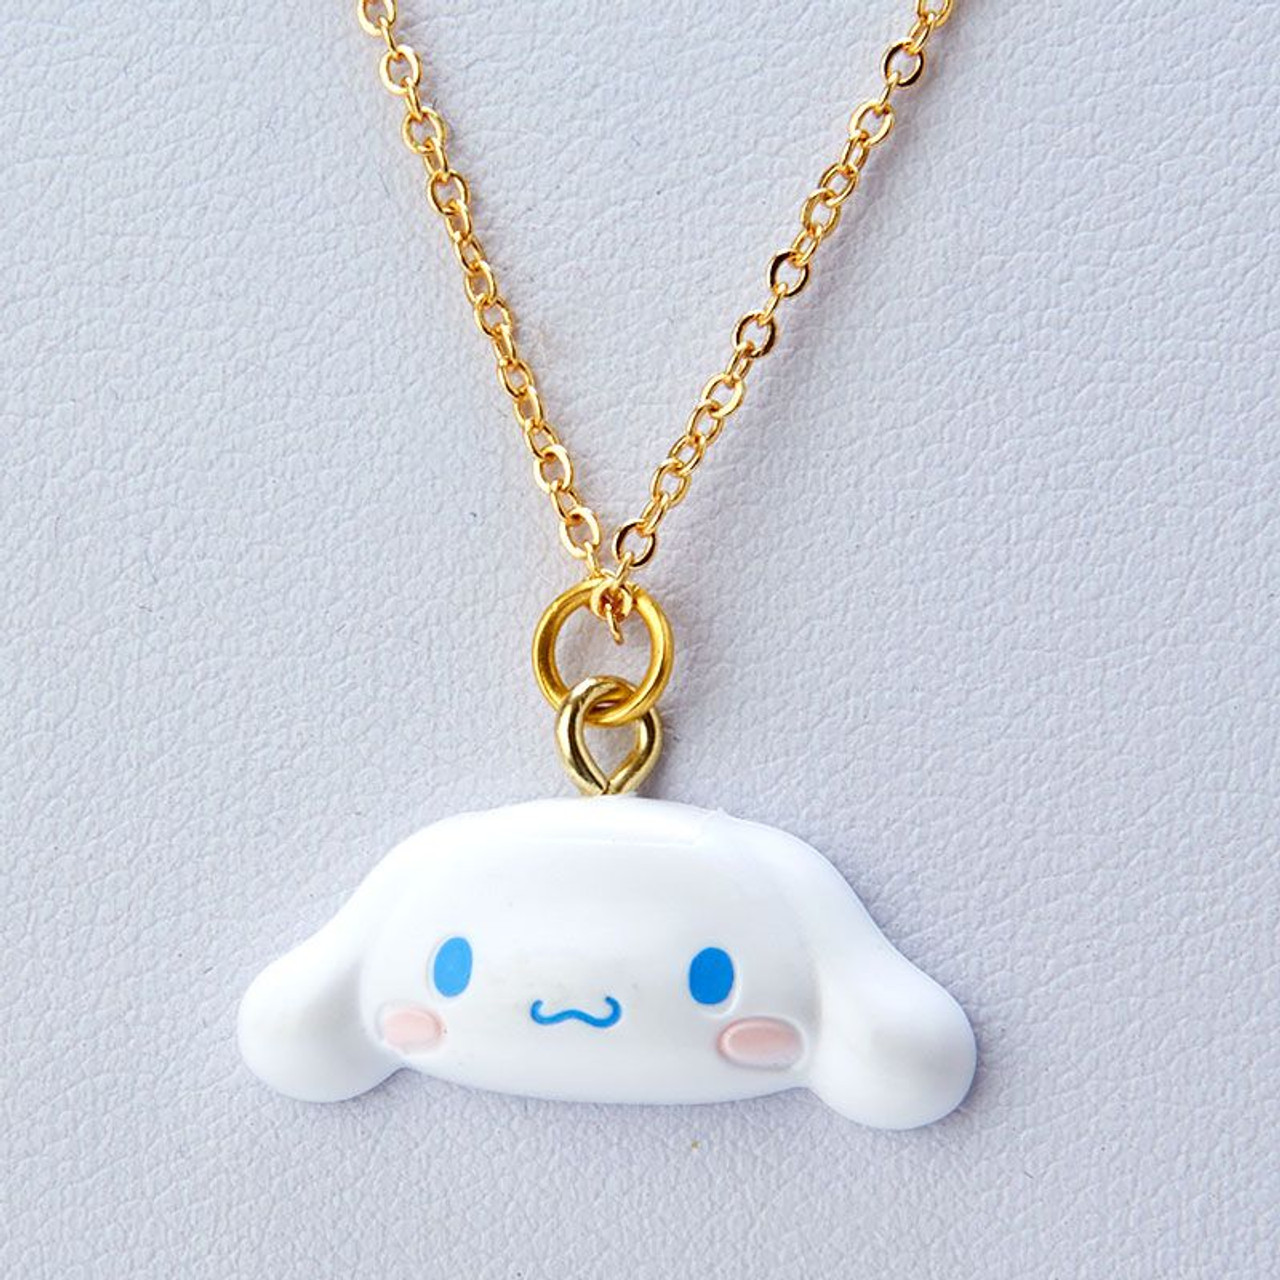 Accessories 3 Pieces Set (Necklace Earrings Ring) Cinnamoroll